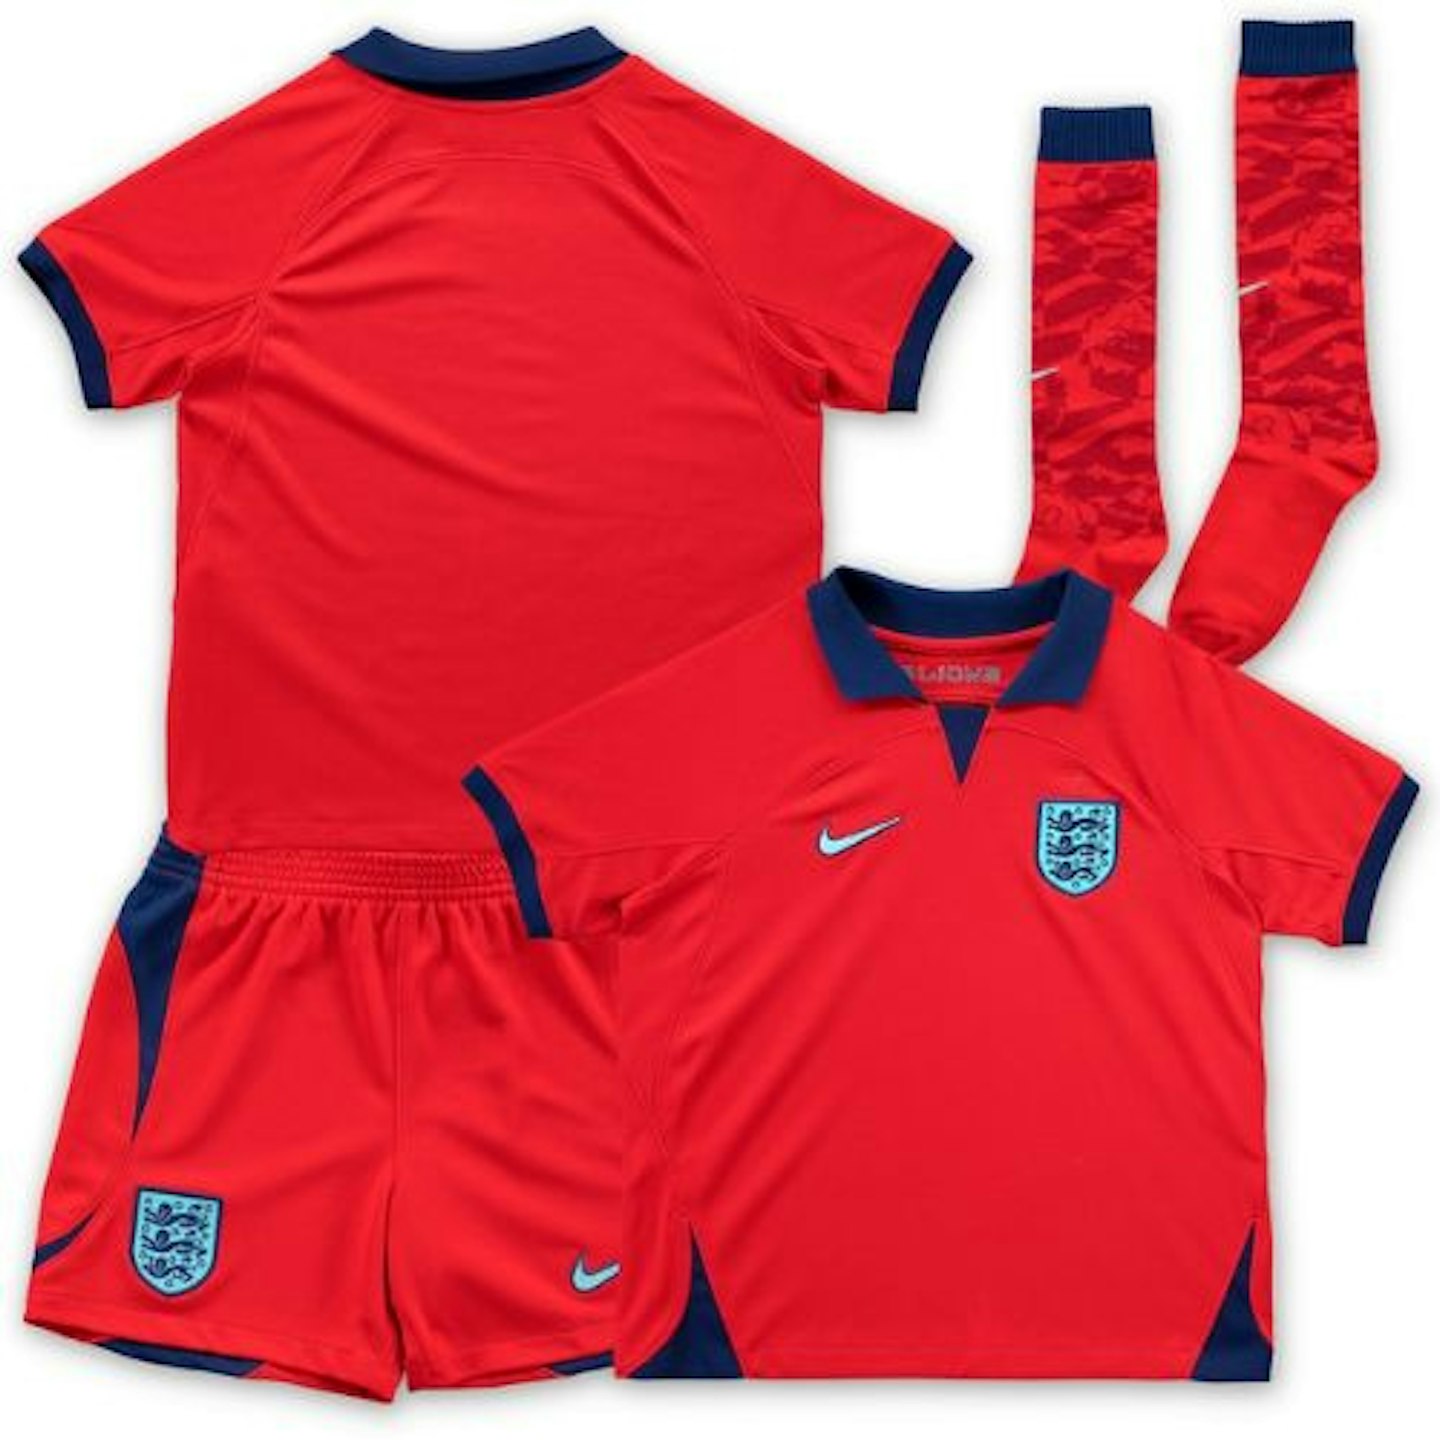 Where to buy England World Cup football kits for kids